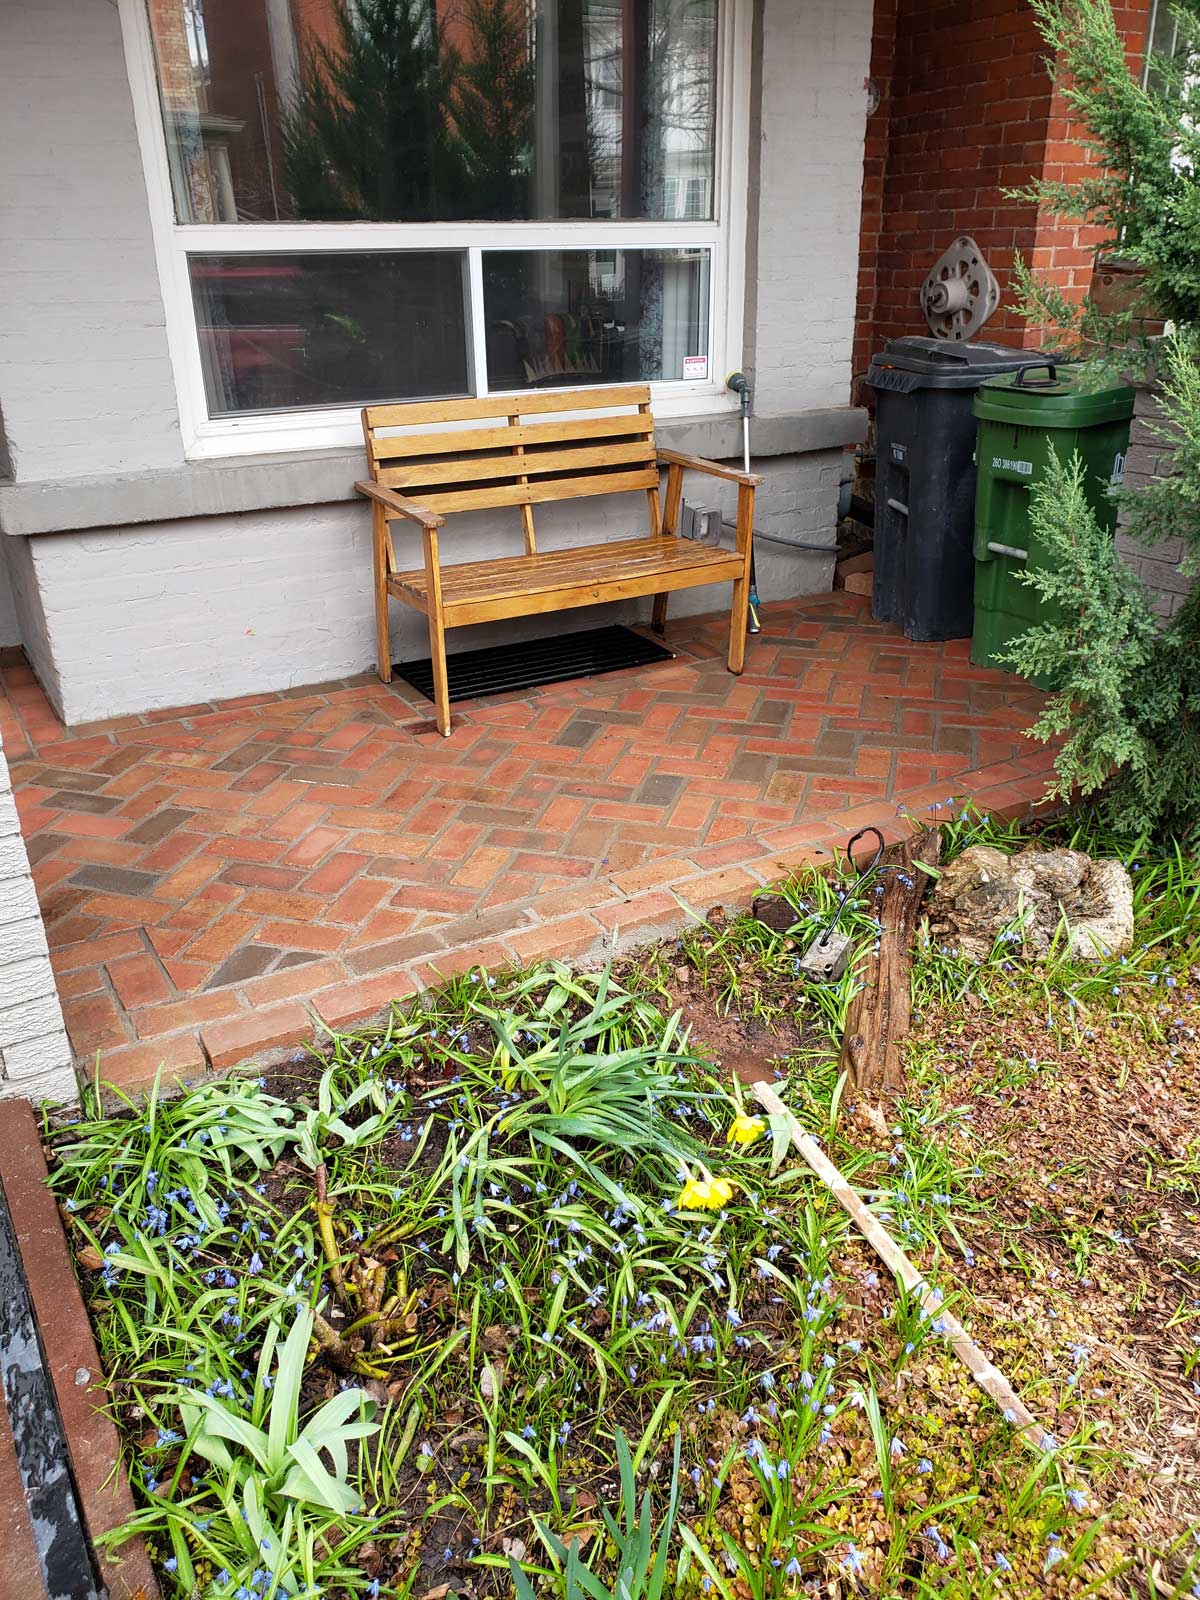 front home porch with patterned brick floor and wooden bench on top in front of window